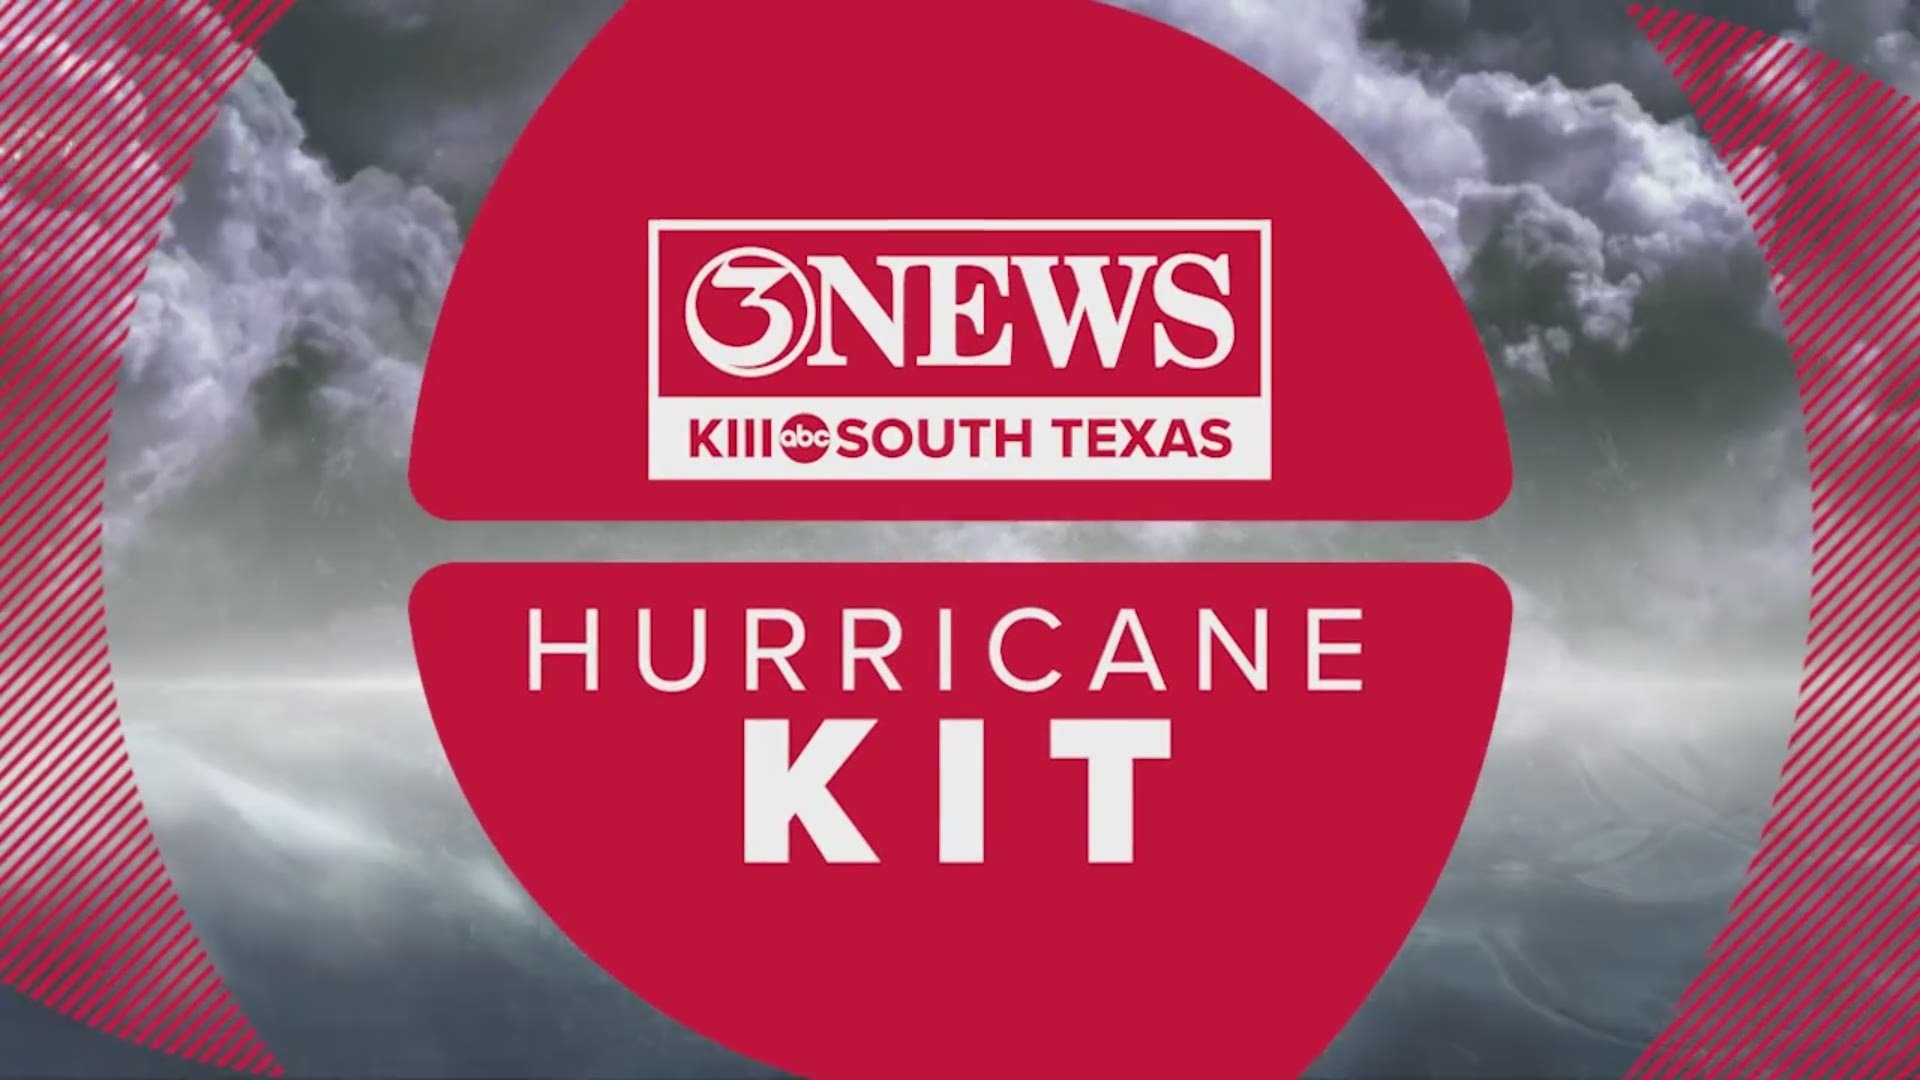 Register for your chance to win a 2020 KIII-TV Hurricane Kit!